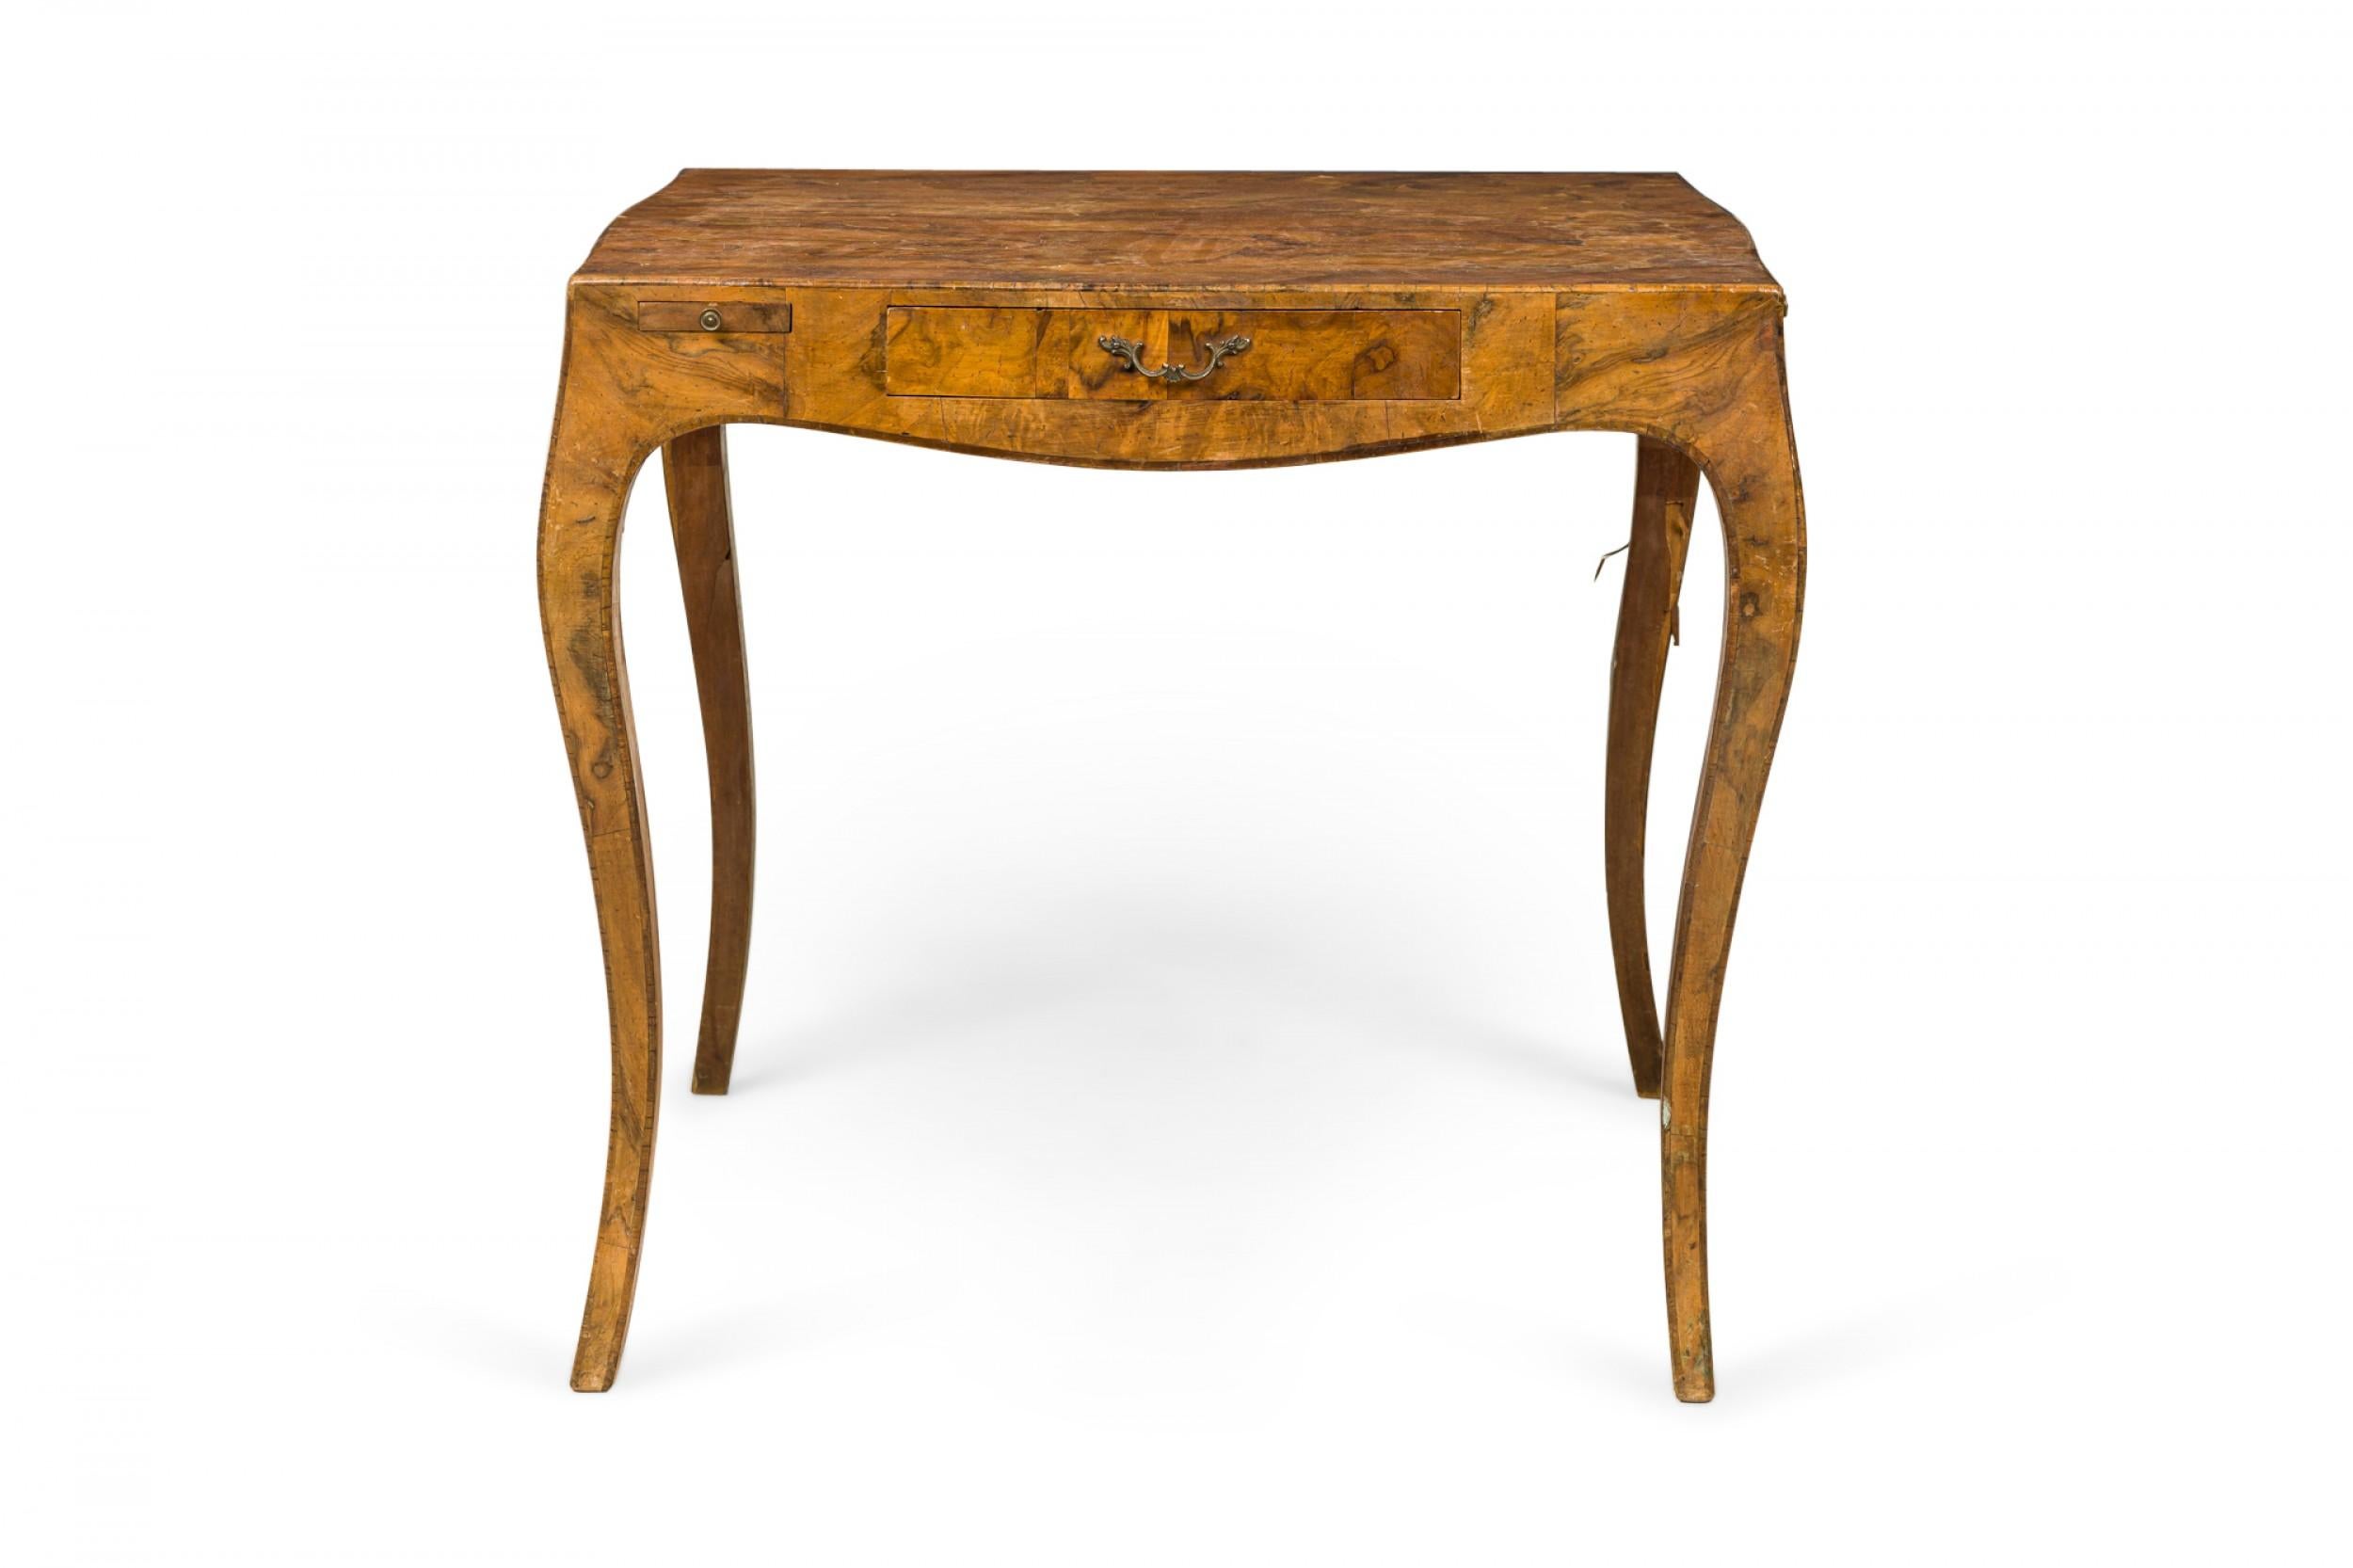 Italian Mid-Century square top game table with oyster burl veneer and a single drawer with a brass drawer pull, resting on four curved legs.
